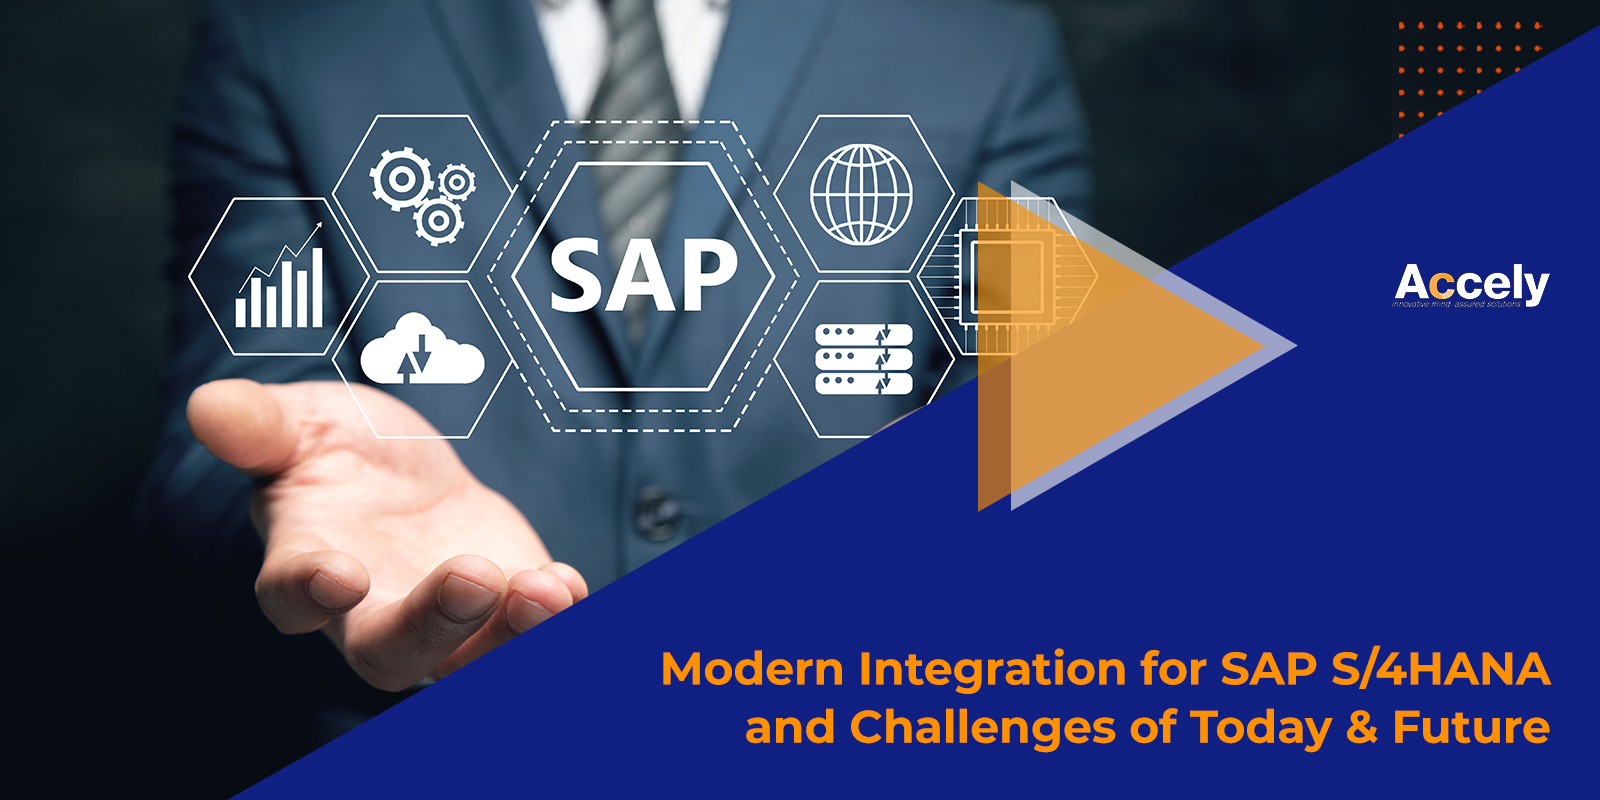 Modern Integration for SAP S/4HANA and Challenges of Today & Future